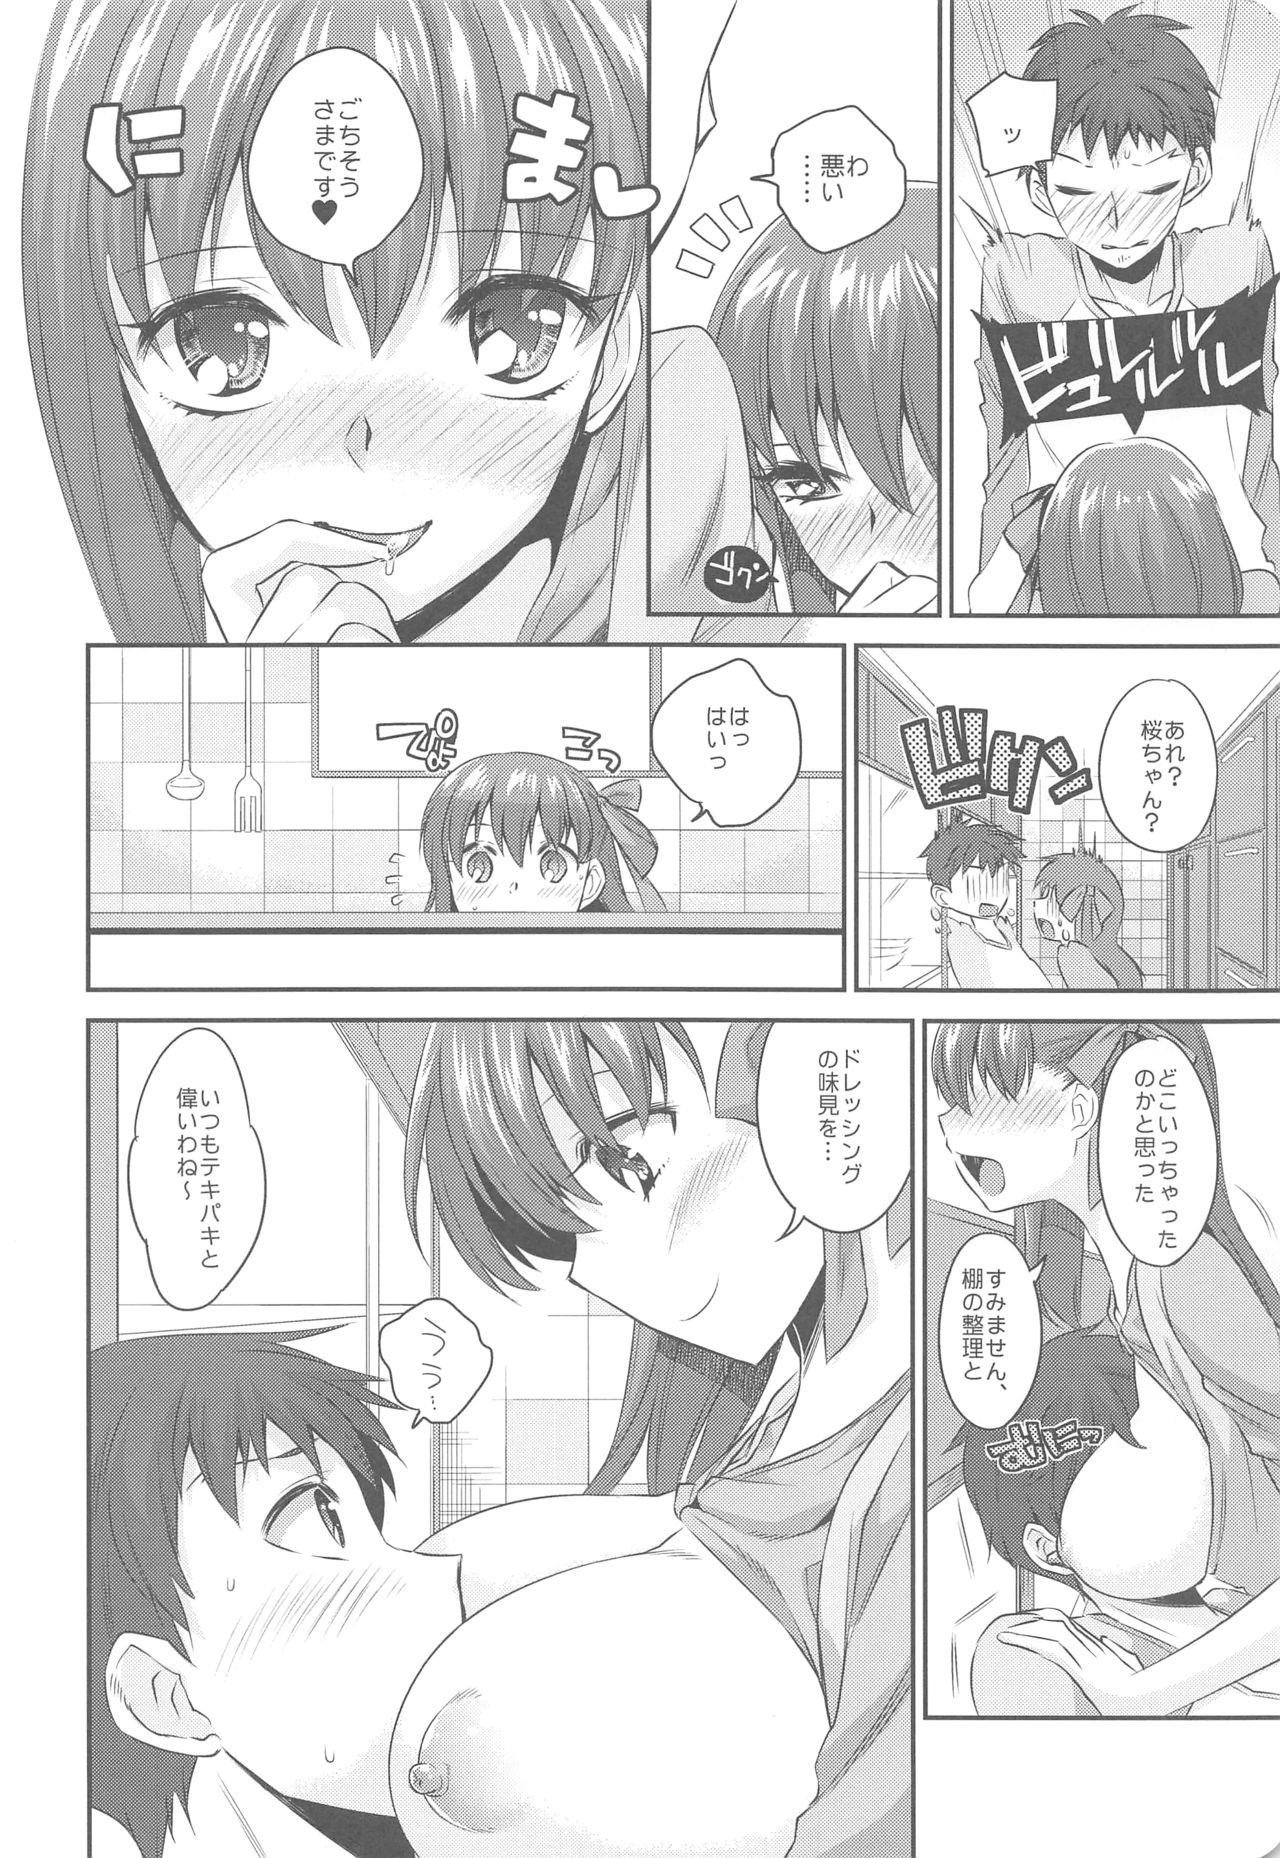 Viet Nam Kitchen H - Fate stay night Lingerie - Page 8